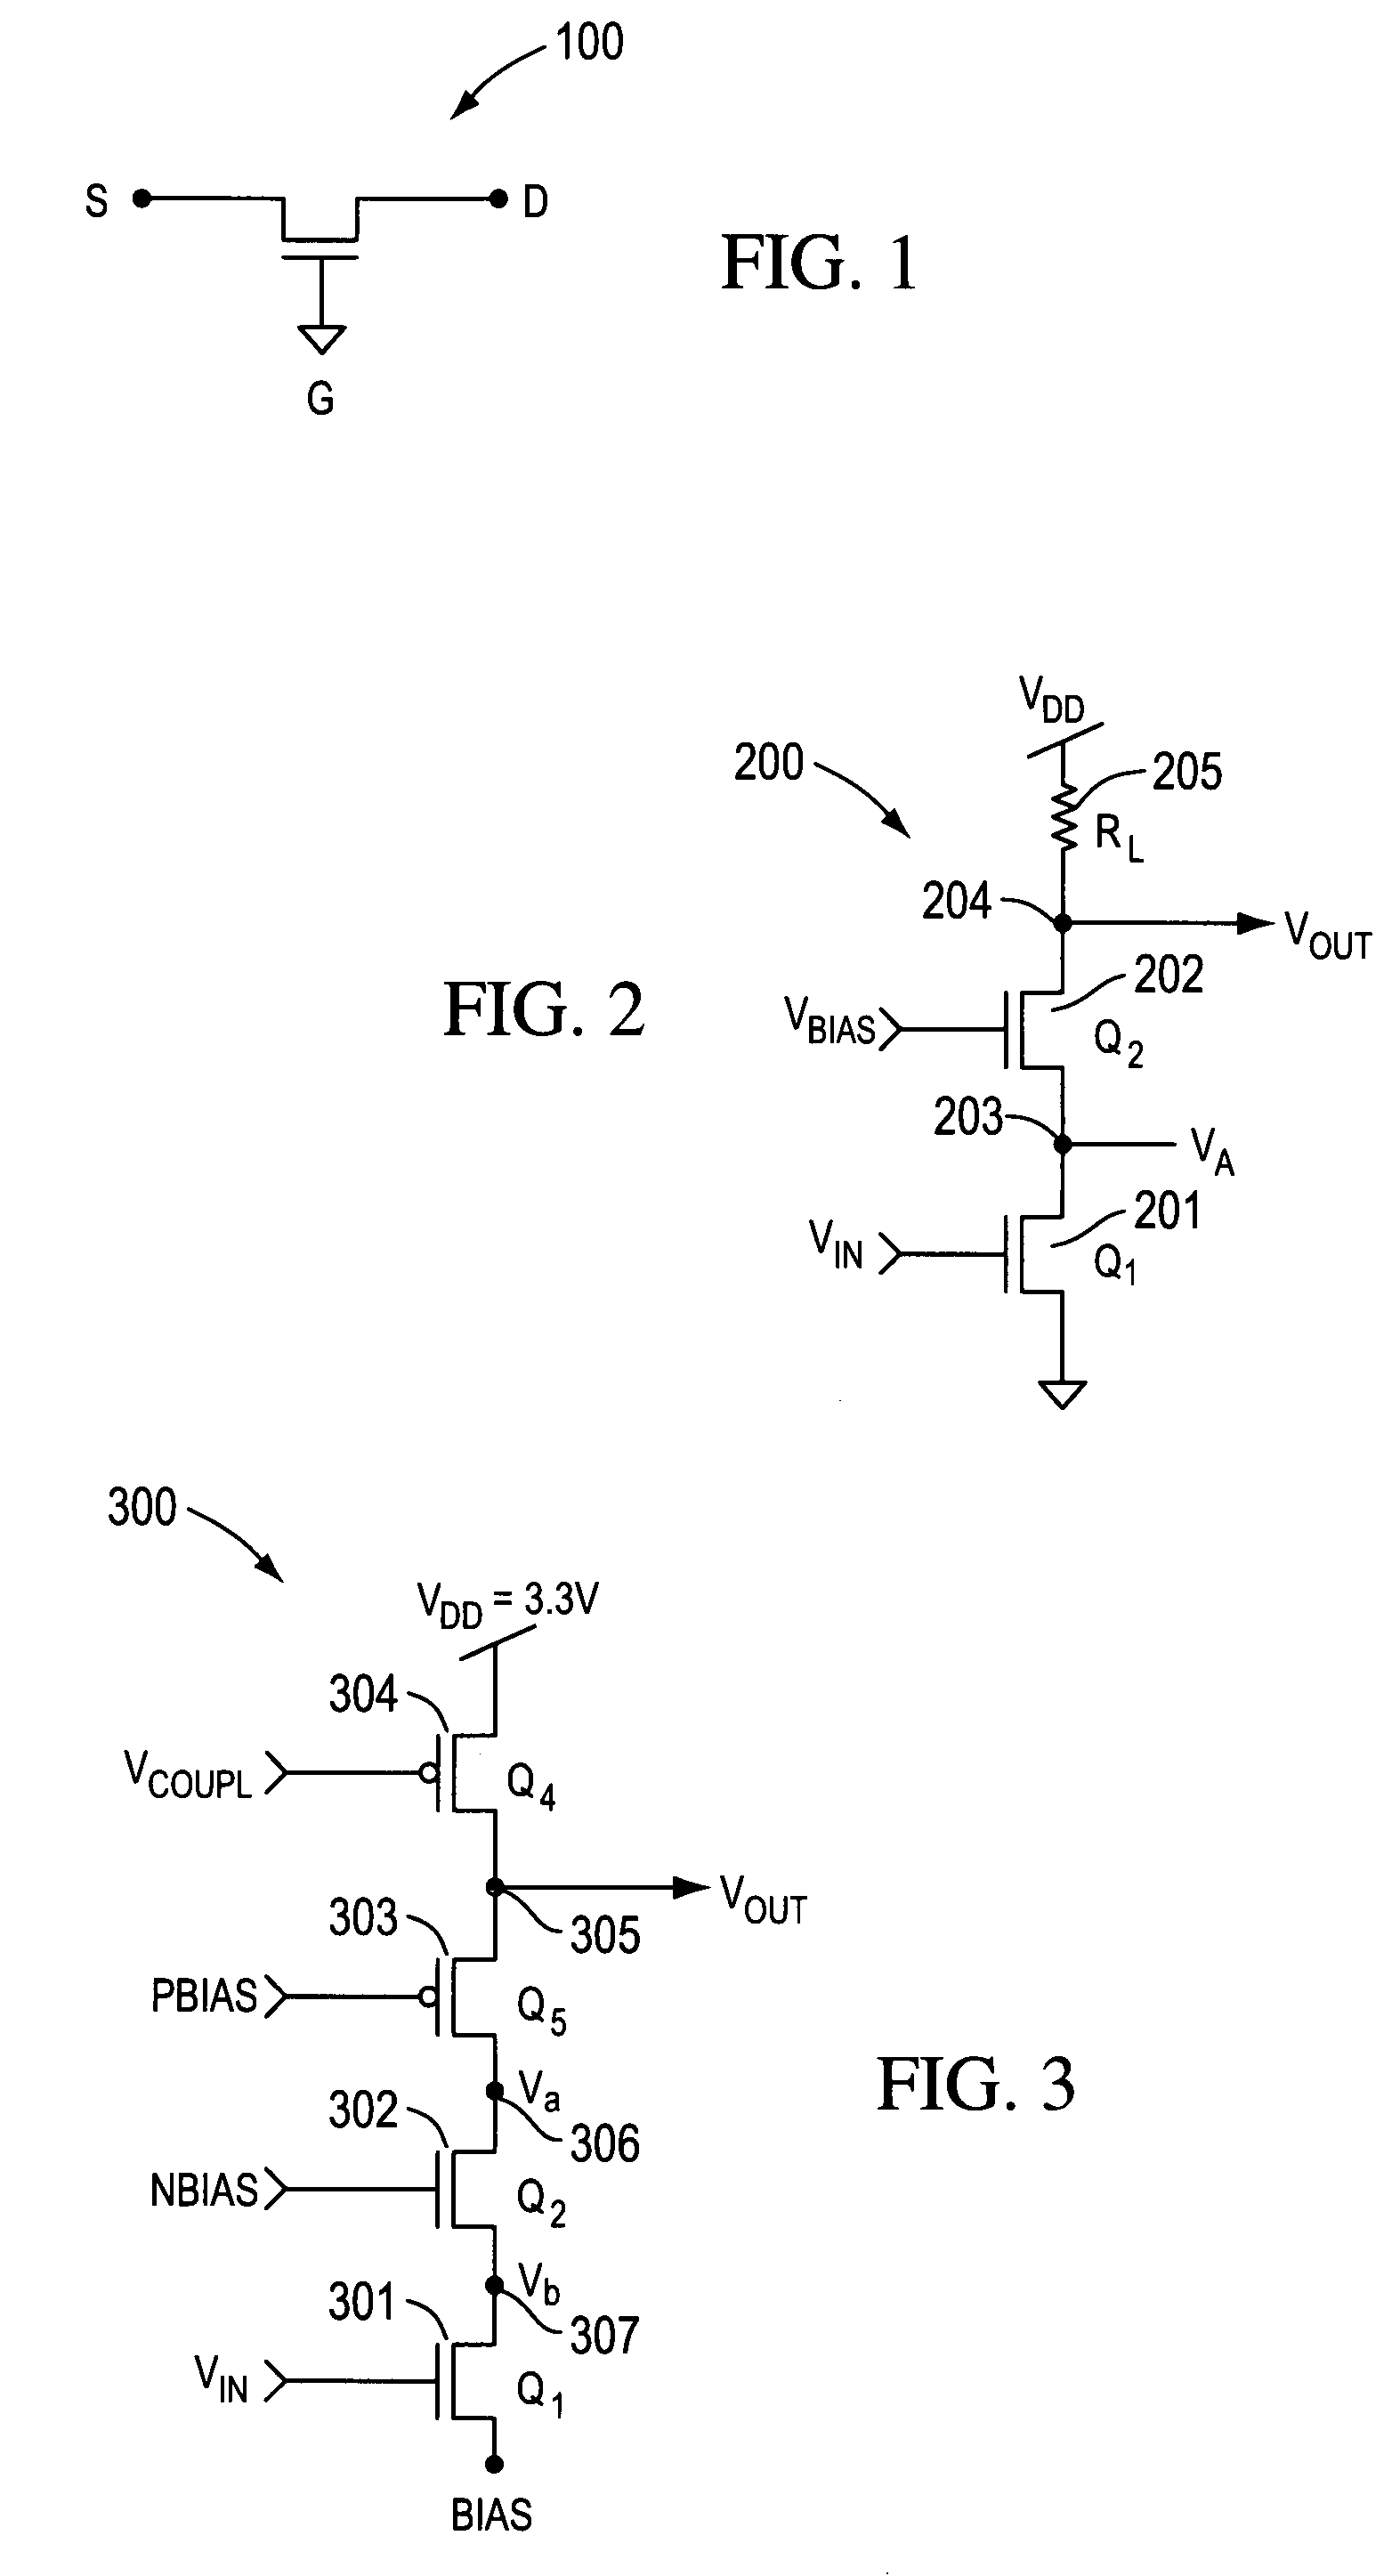 High-speed, low-power level shifter for mixed signal-level environments